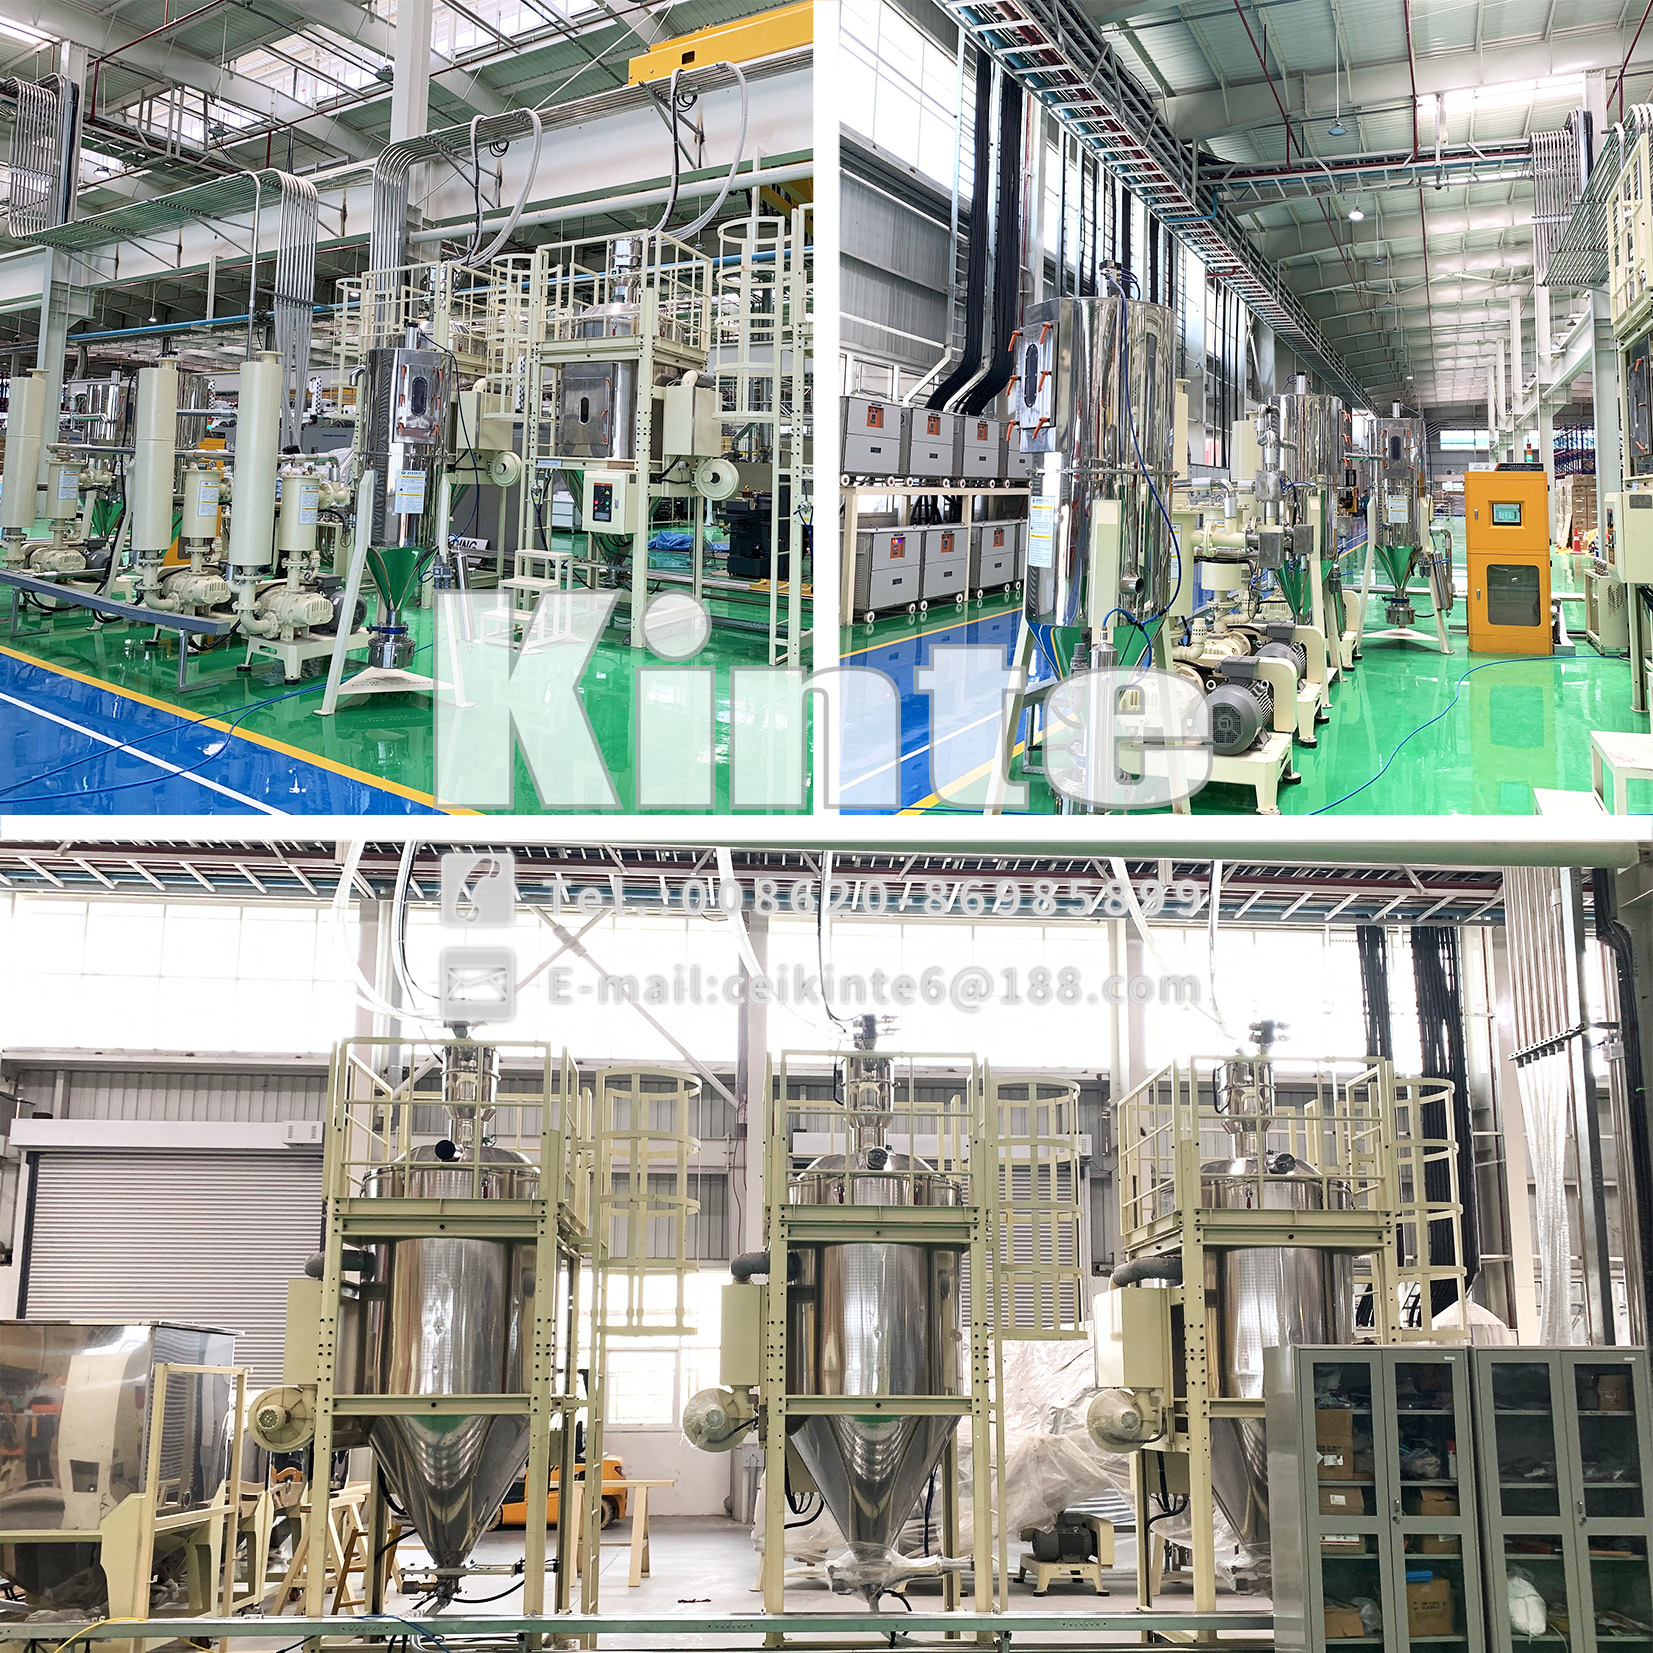 Central Feeding System of Material & Water for Injection Molding